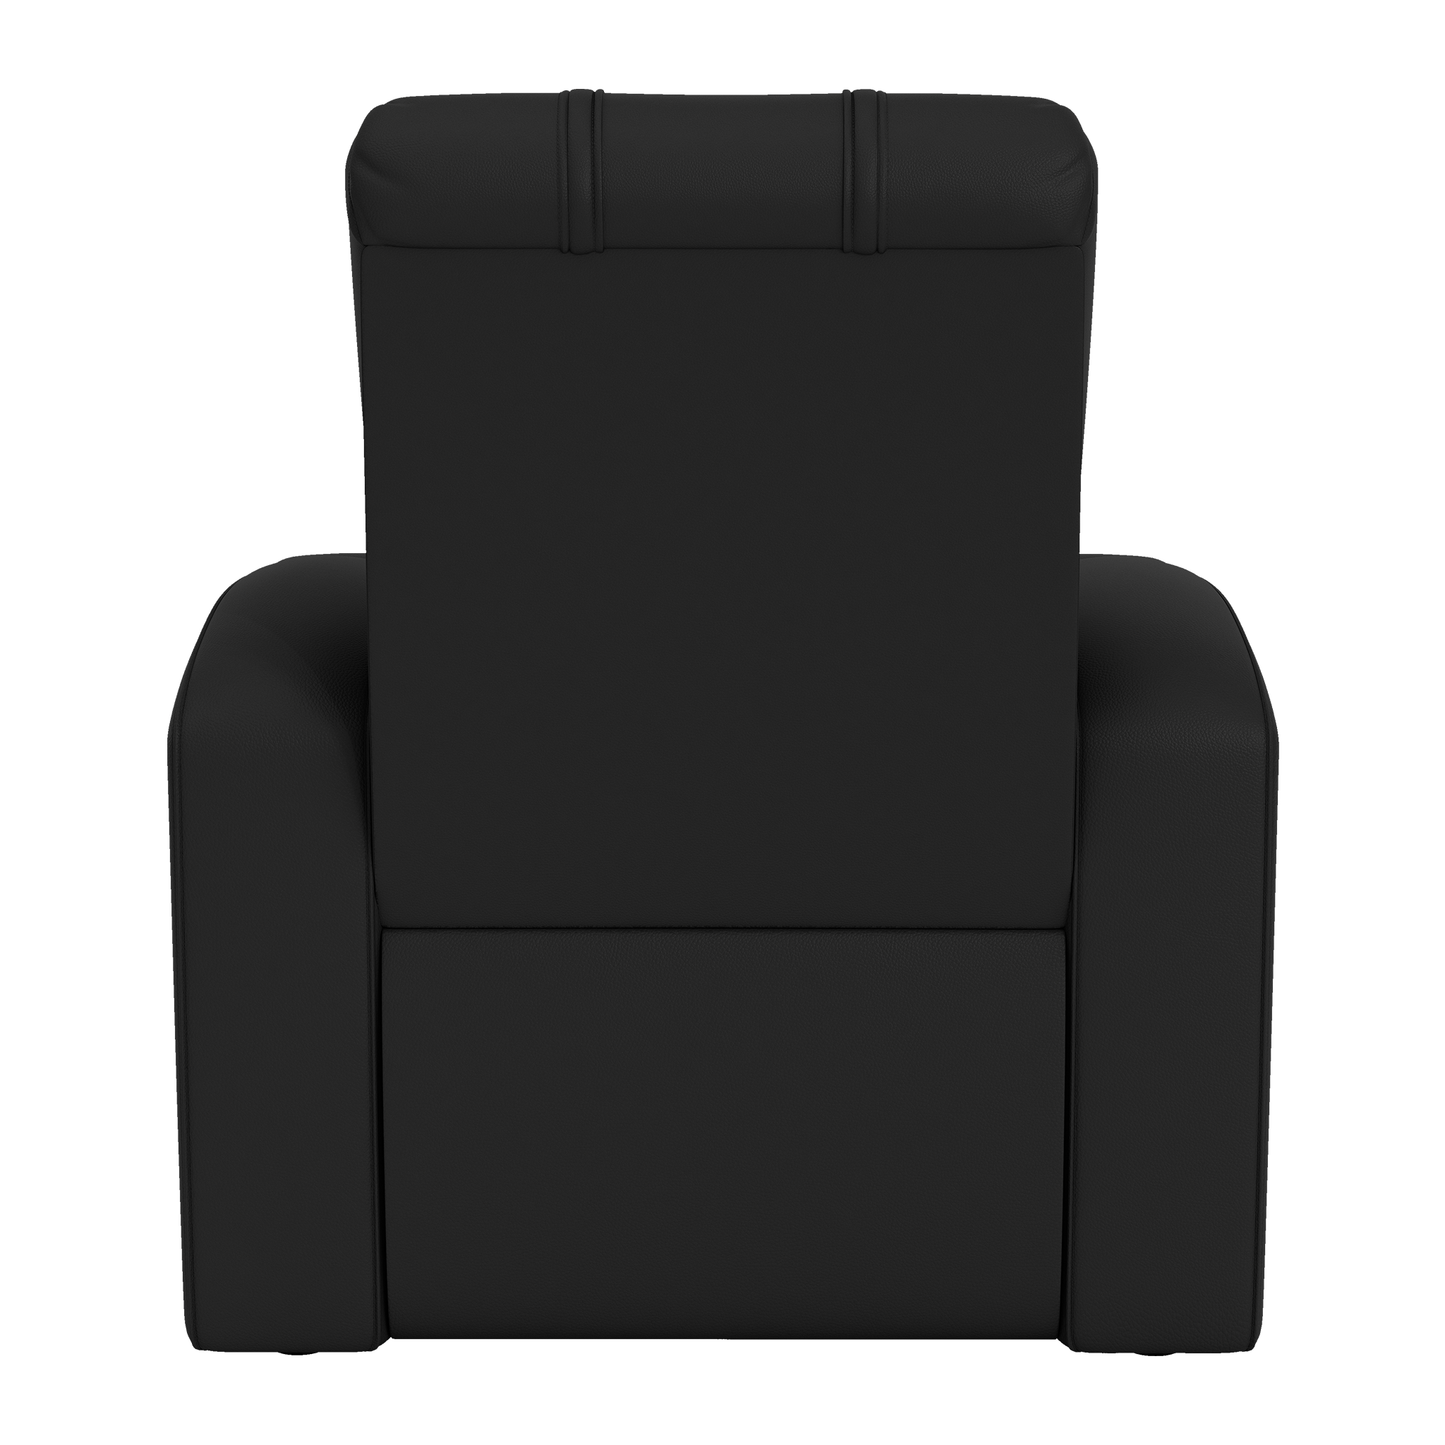 Relax Home Theater Recliner with Central Florida UCF National Champions Logo Panel